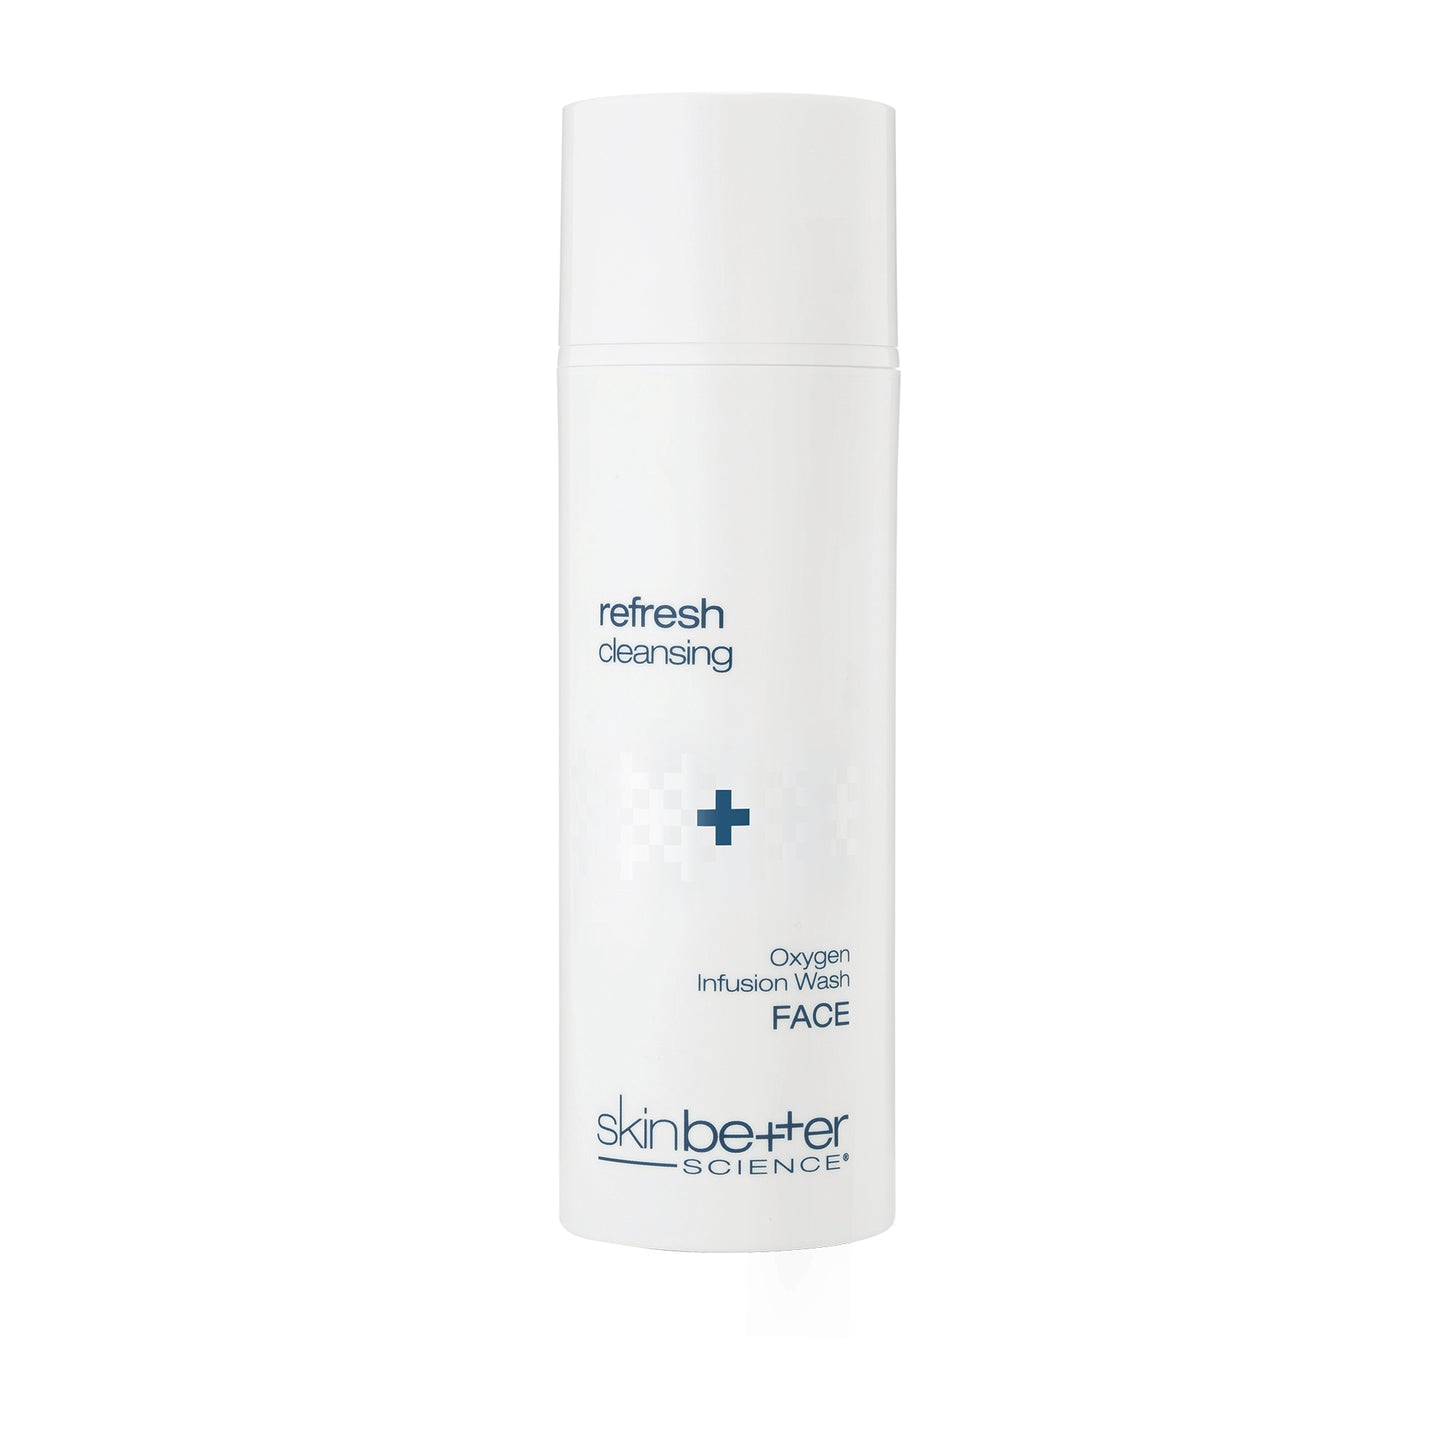 SKIN BETTER SCIENCE - Oxygen Infusion Wash